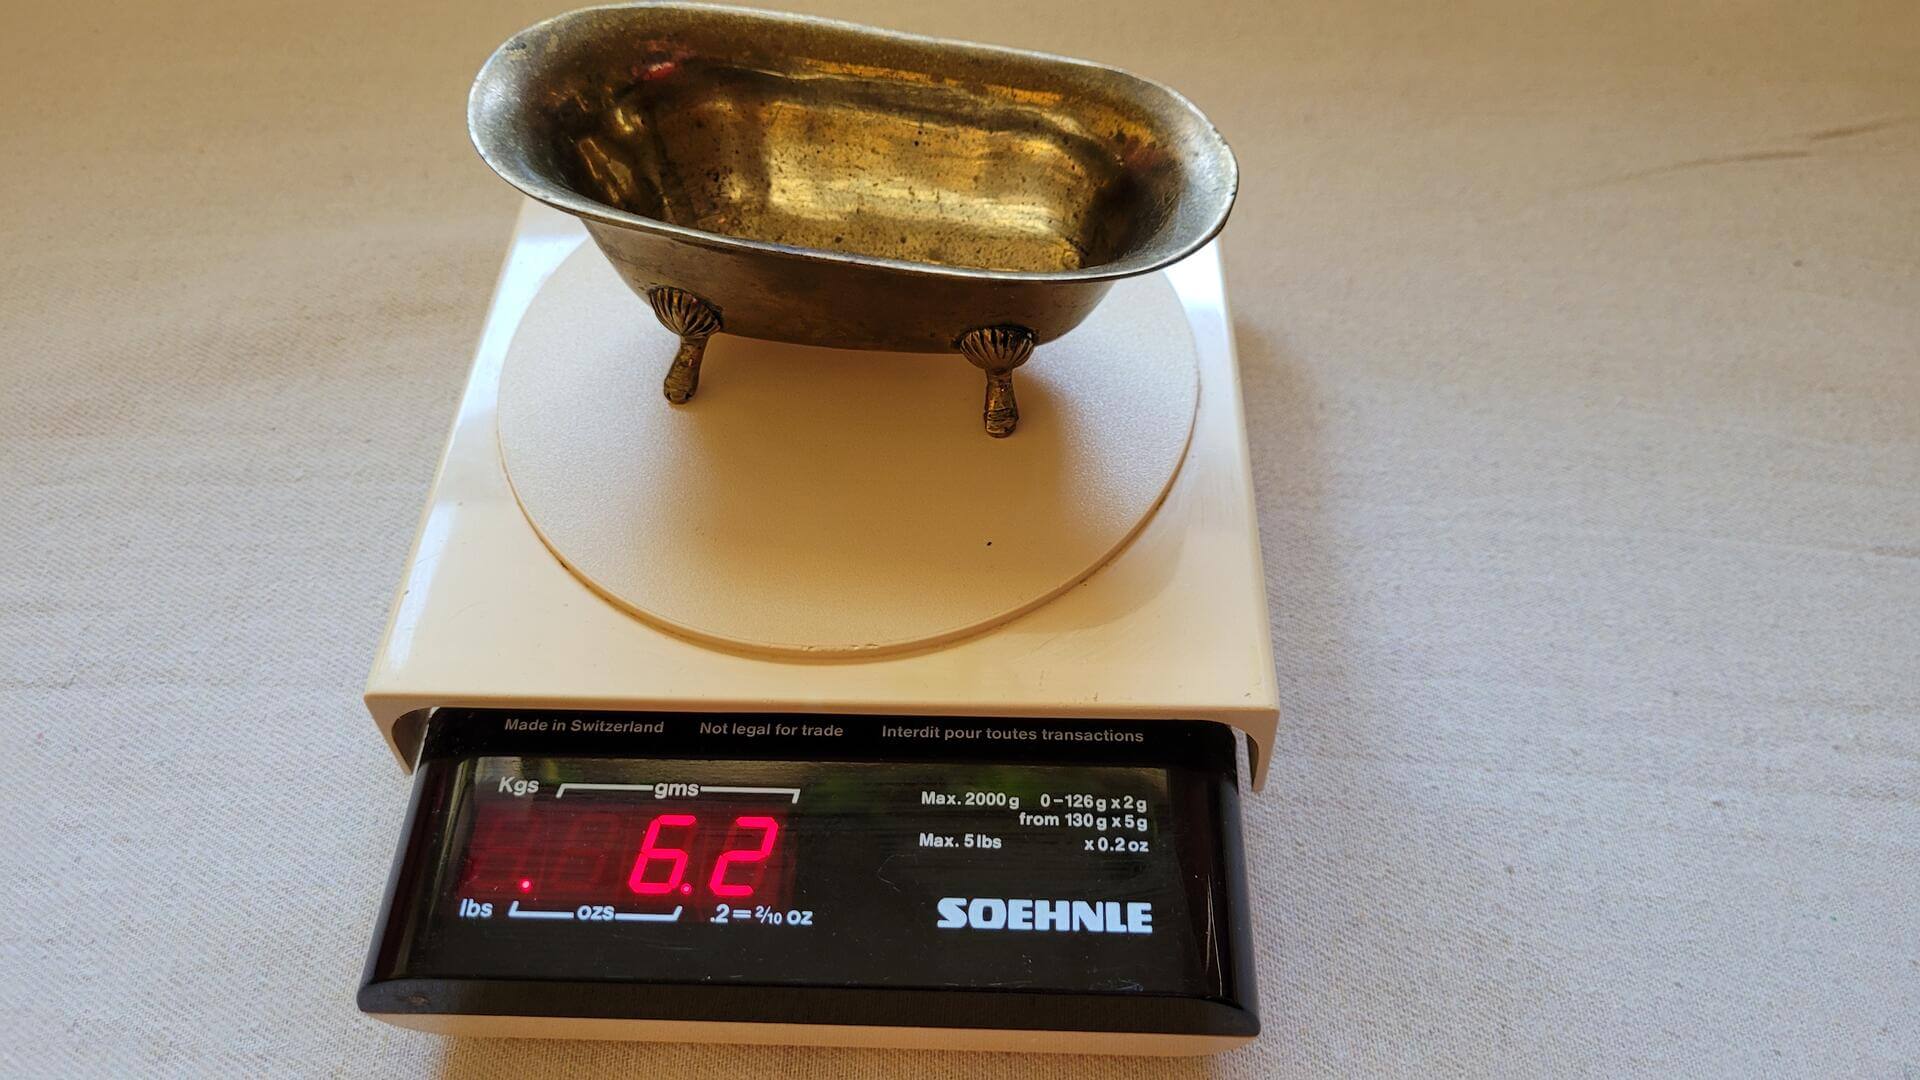 soehnle-industrial-solutions-2000g-5lb-lcd-kitchen-scale-made-in-switzerland-vintage-retro-design-measuring-digital-tools-and-kitchenware